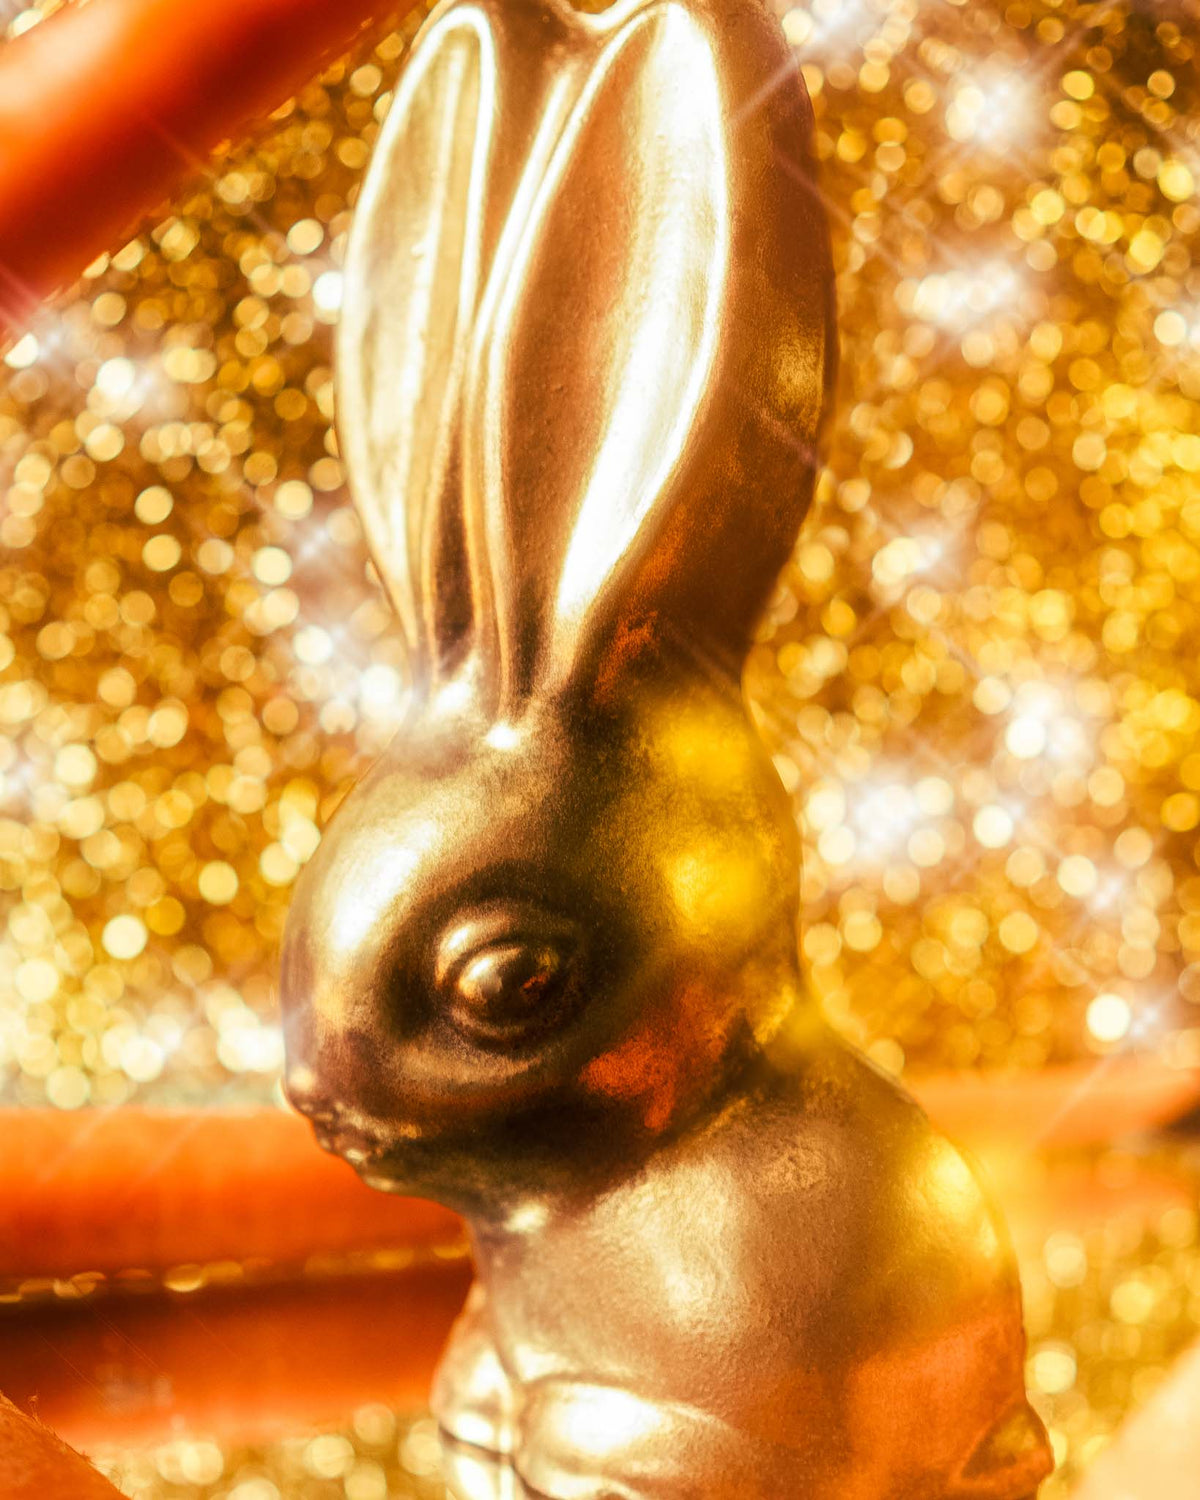 Gourmet Chocolate Easter Bunny - 24 karat Gold Chocolates for Easter Gifts